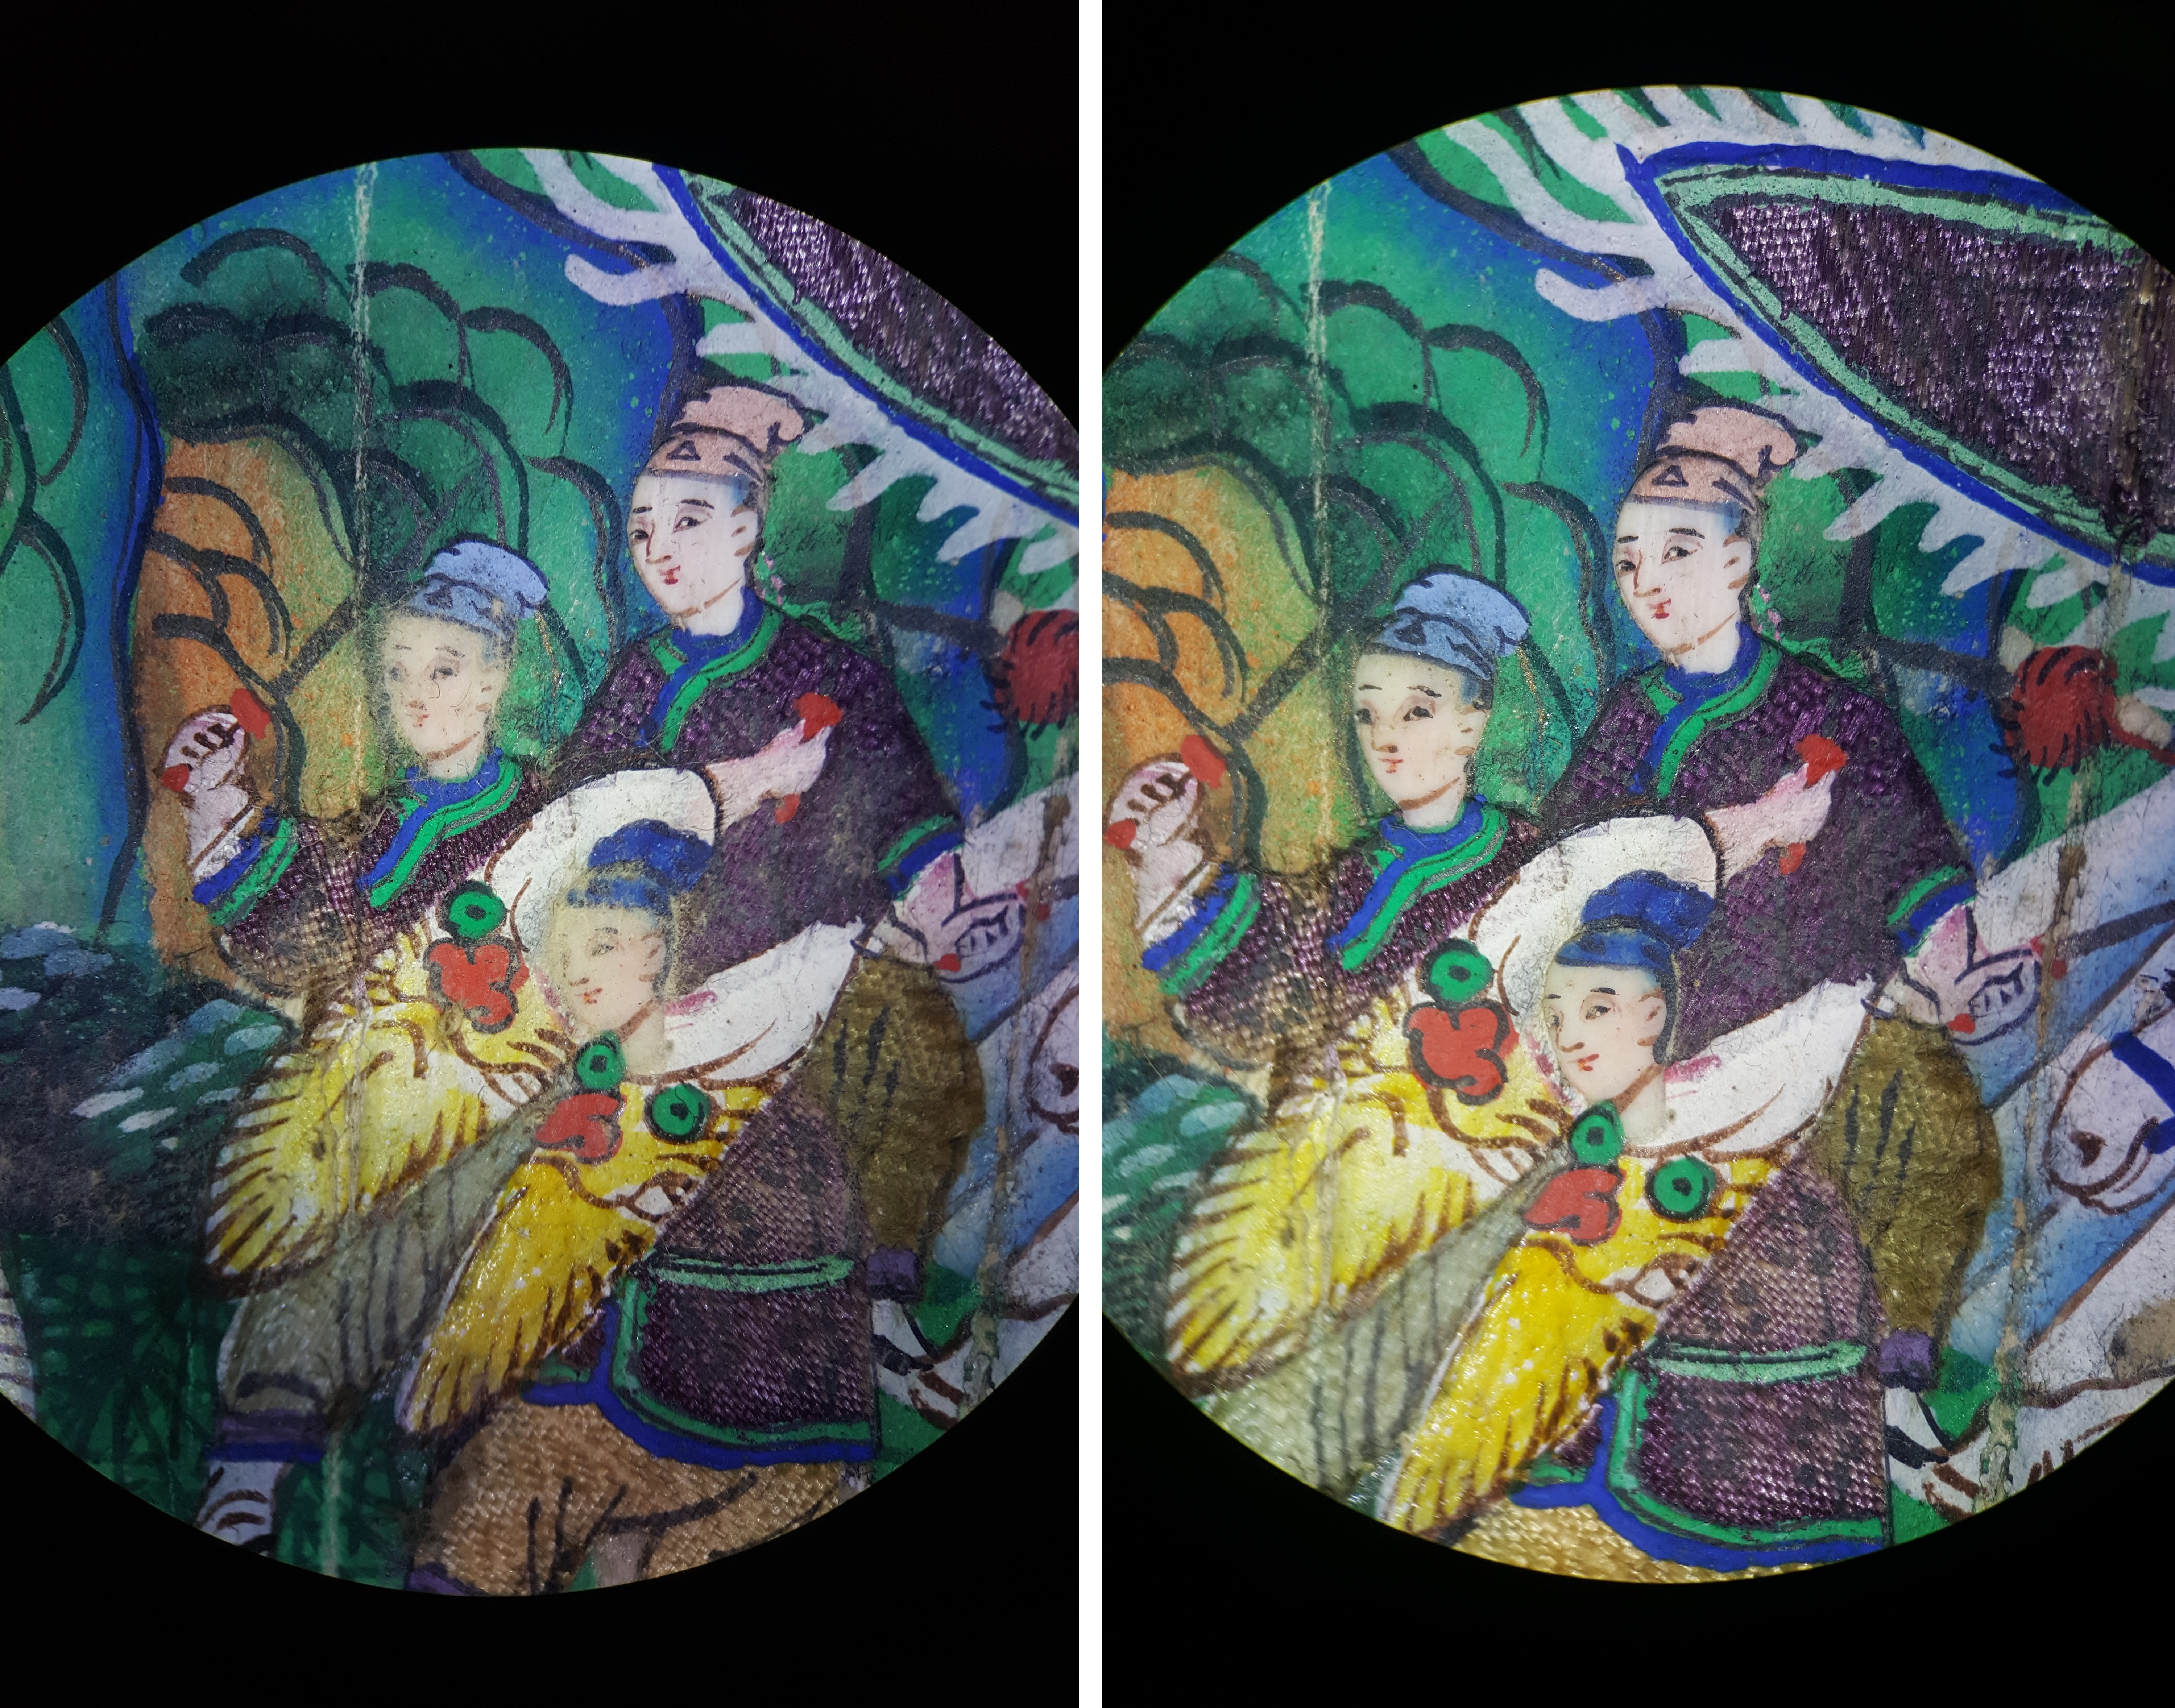 Two photos showing details of the same area of the fan where there are three figures in purple robes on a busy background. In the left image, there is dust and debris on the surface, particularly obscuring the faces of the figures. On the right, this has been cleaned off the surface.